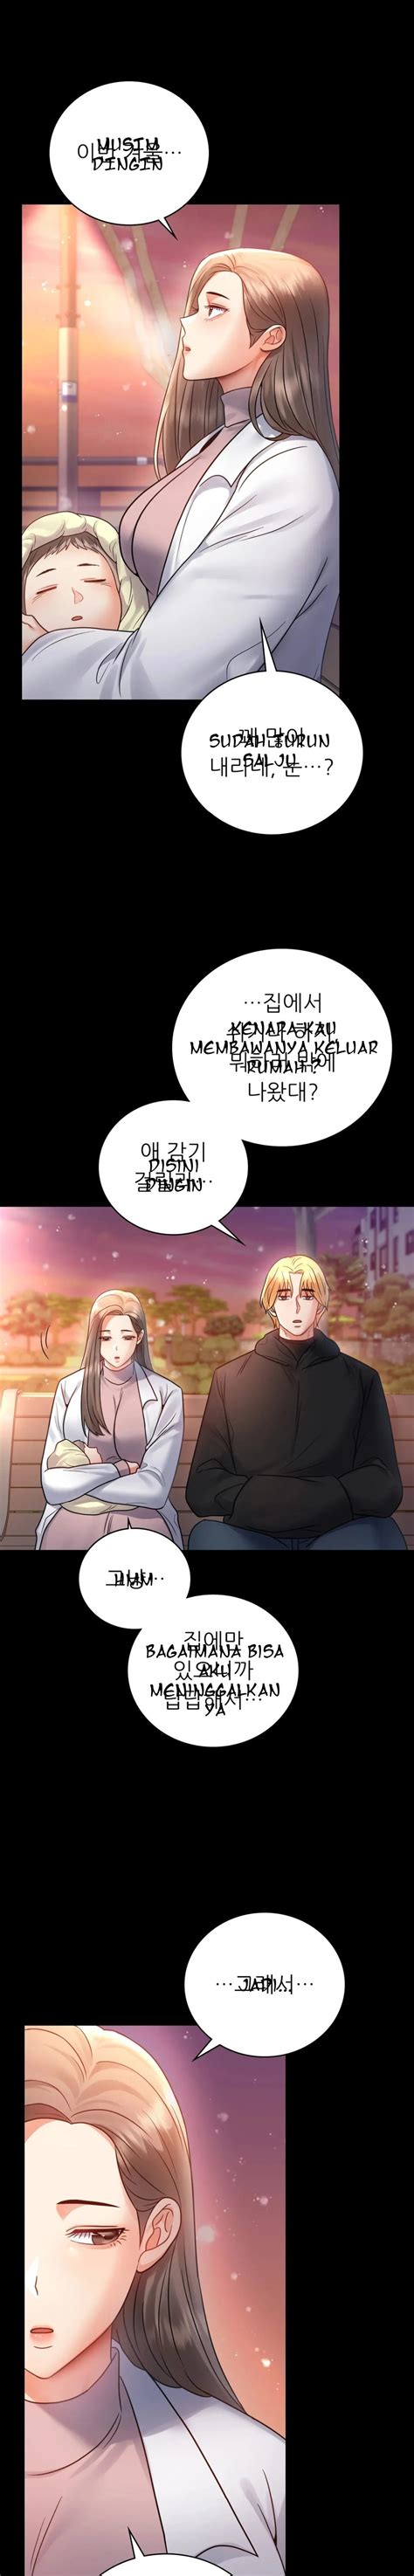 Illicit love chapter 75. Illicit Love also known as: 불륜학개론 / Introduction to an affair. This is the Ongoing Manhwa was released on 2022. The story was written by Jiro and illustrations by Jiro. Illicit Love is about Drama, Romance. If you want to get the updates about latest chapters, lets create an account and add Illicit Love Manhwa to your bookmark. 